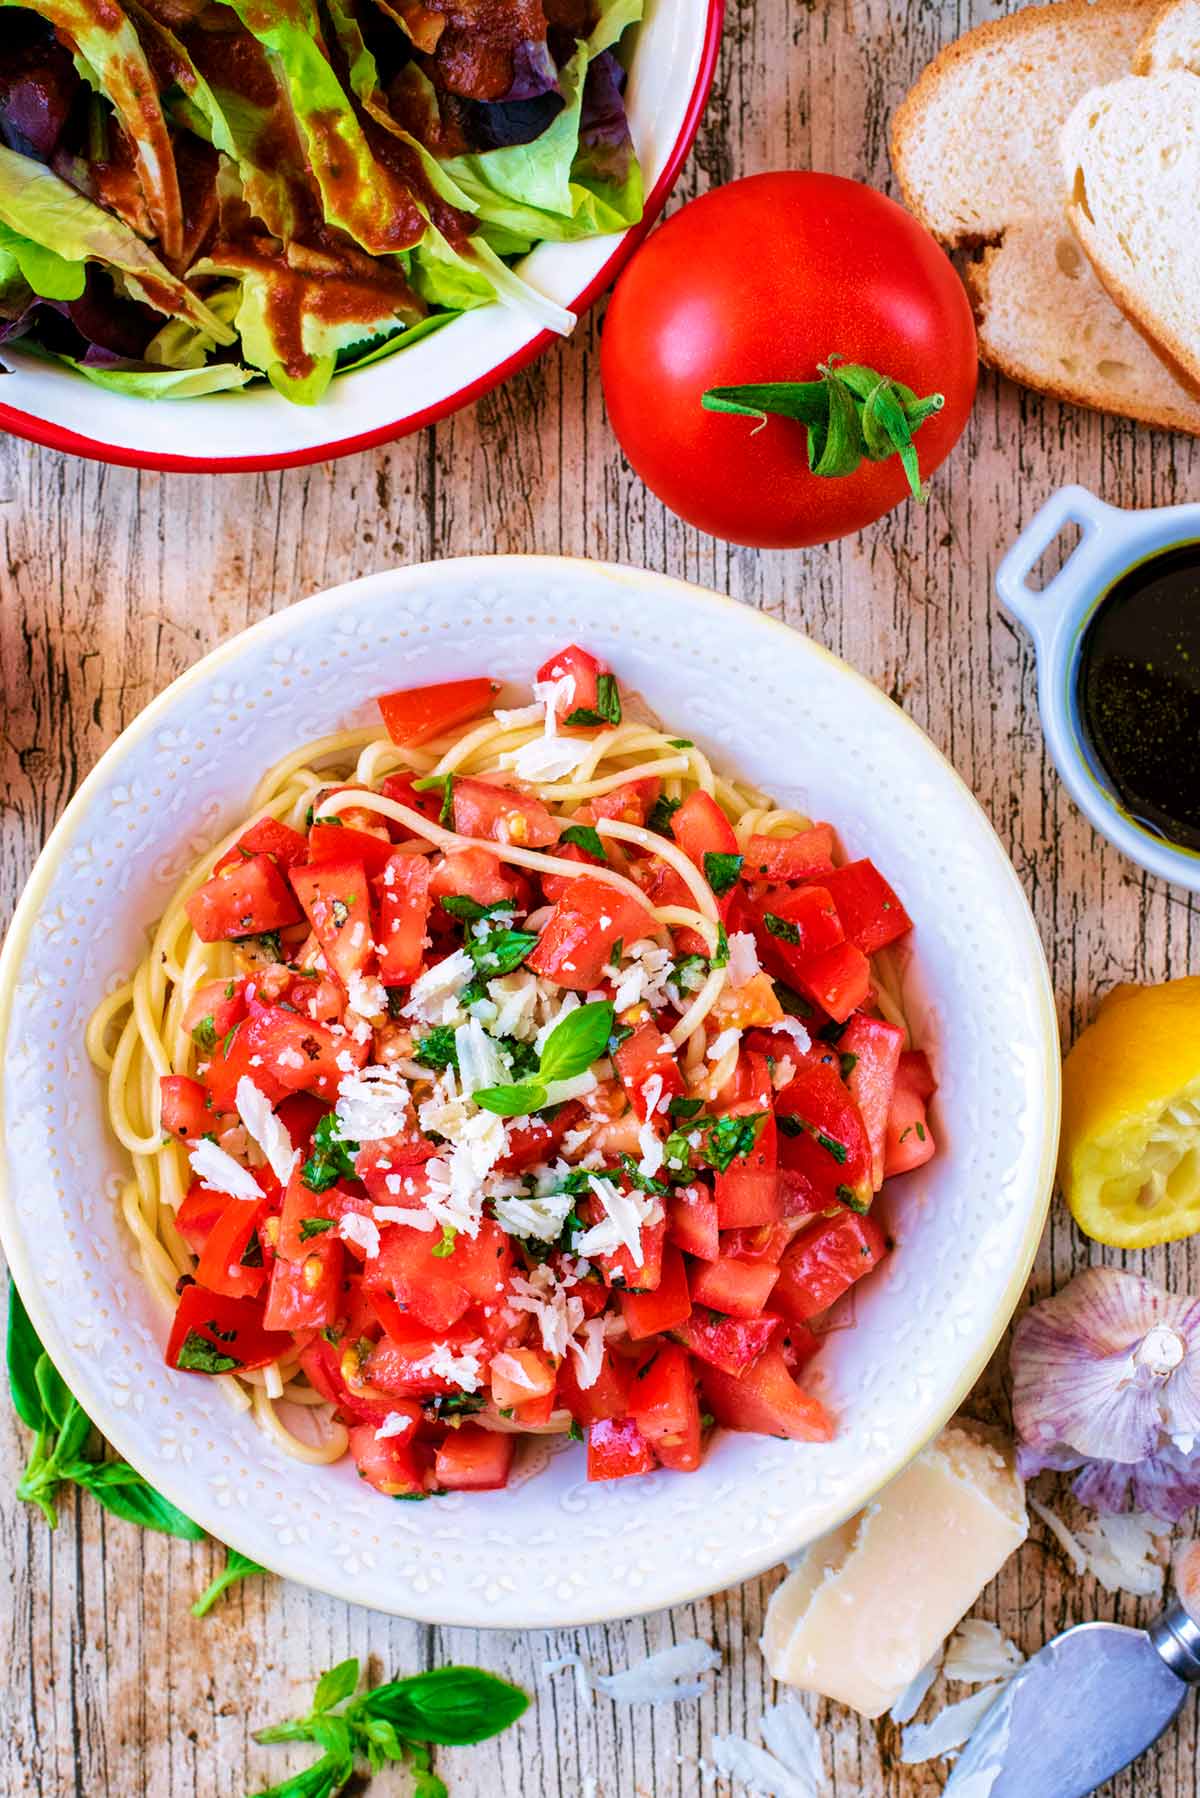 A bowl of Tomato Pasta next to a bowl of salad, a whole tomato and a halved lemon.